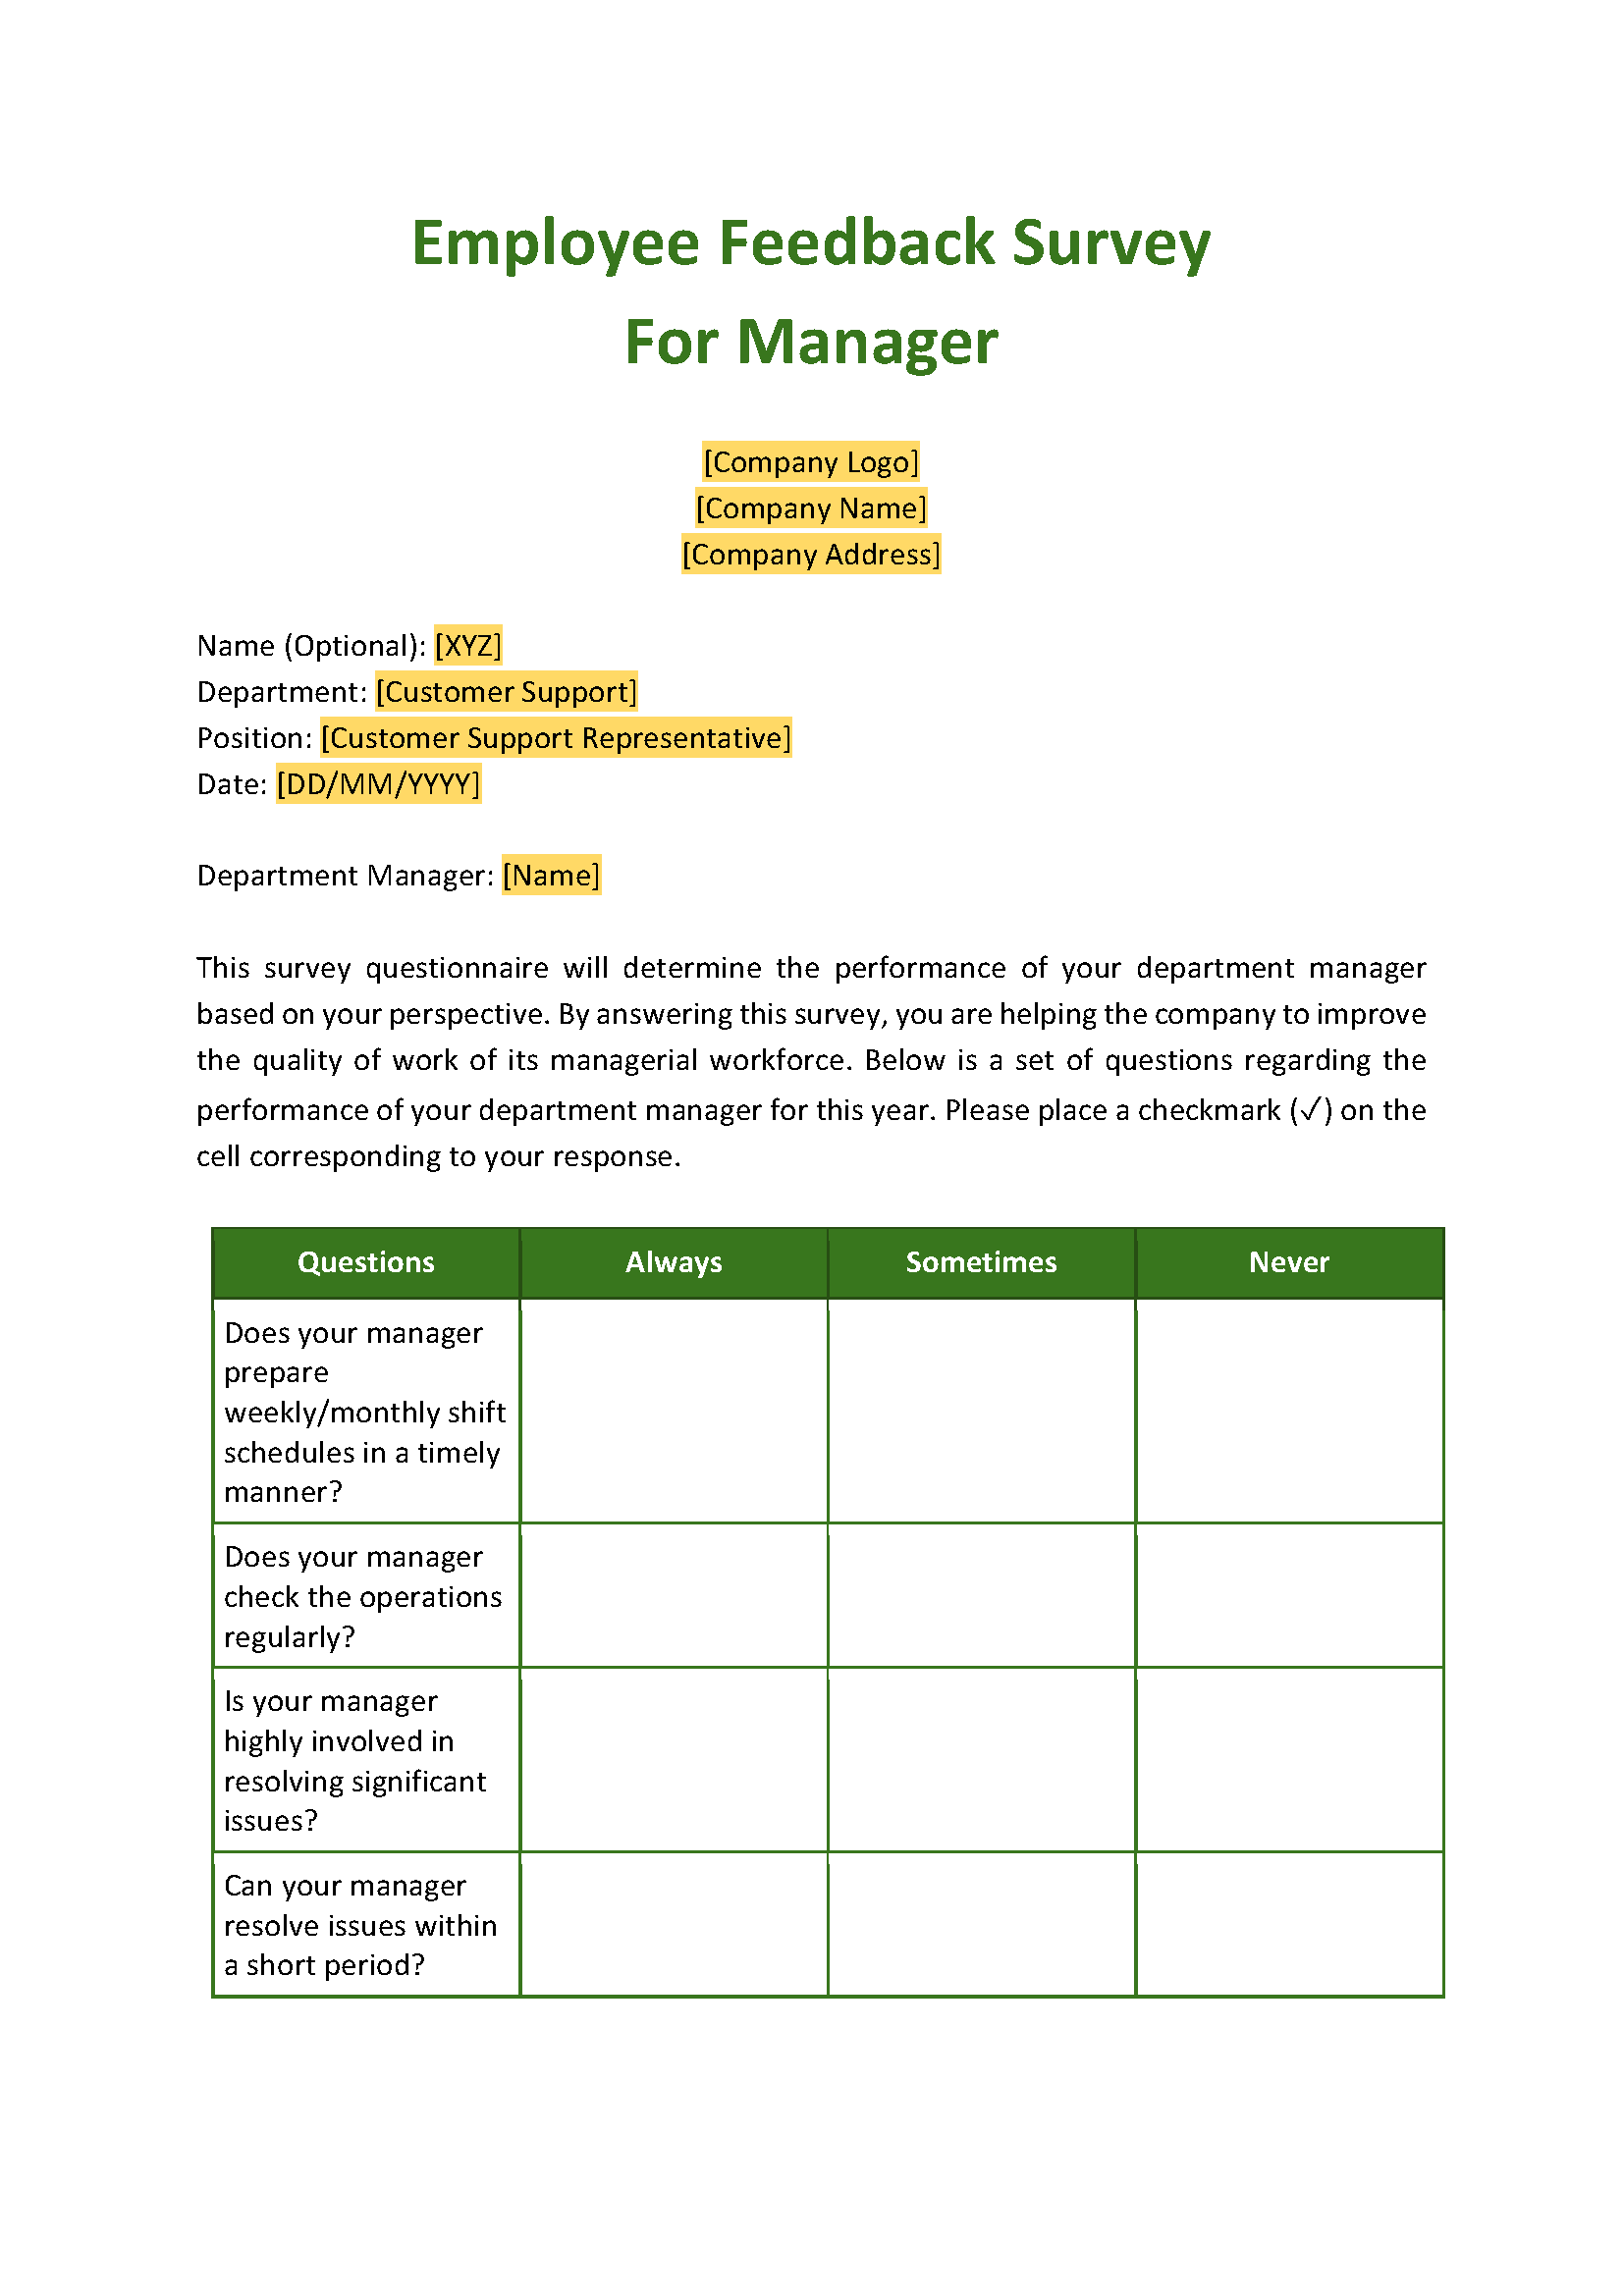 Employee Feedback Survey for Manager Template A4